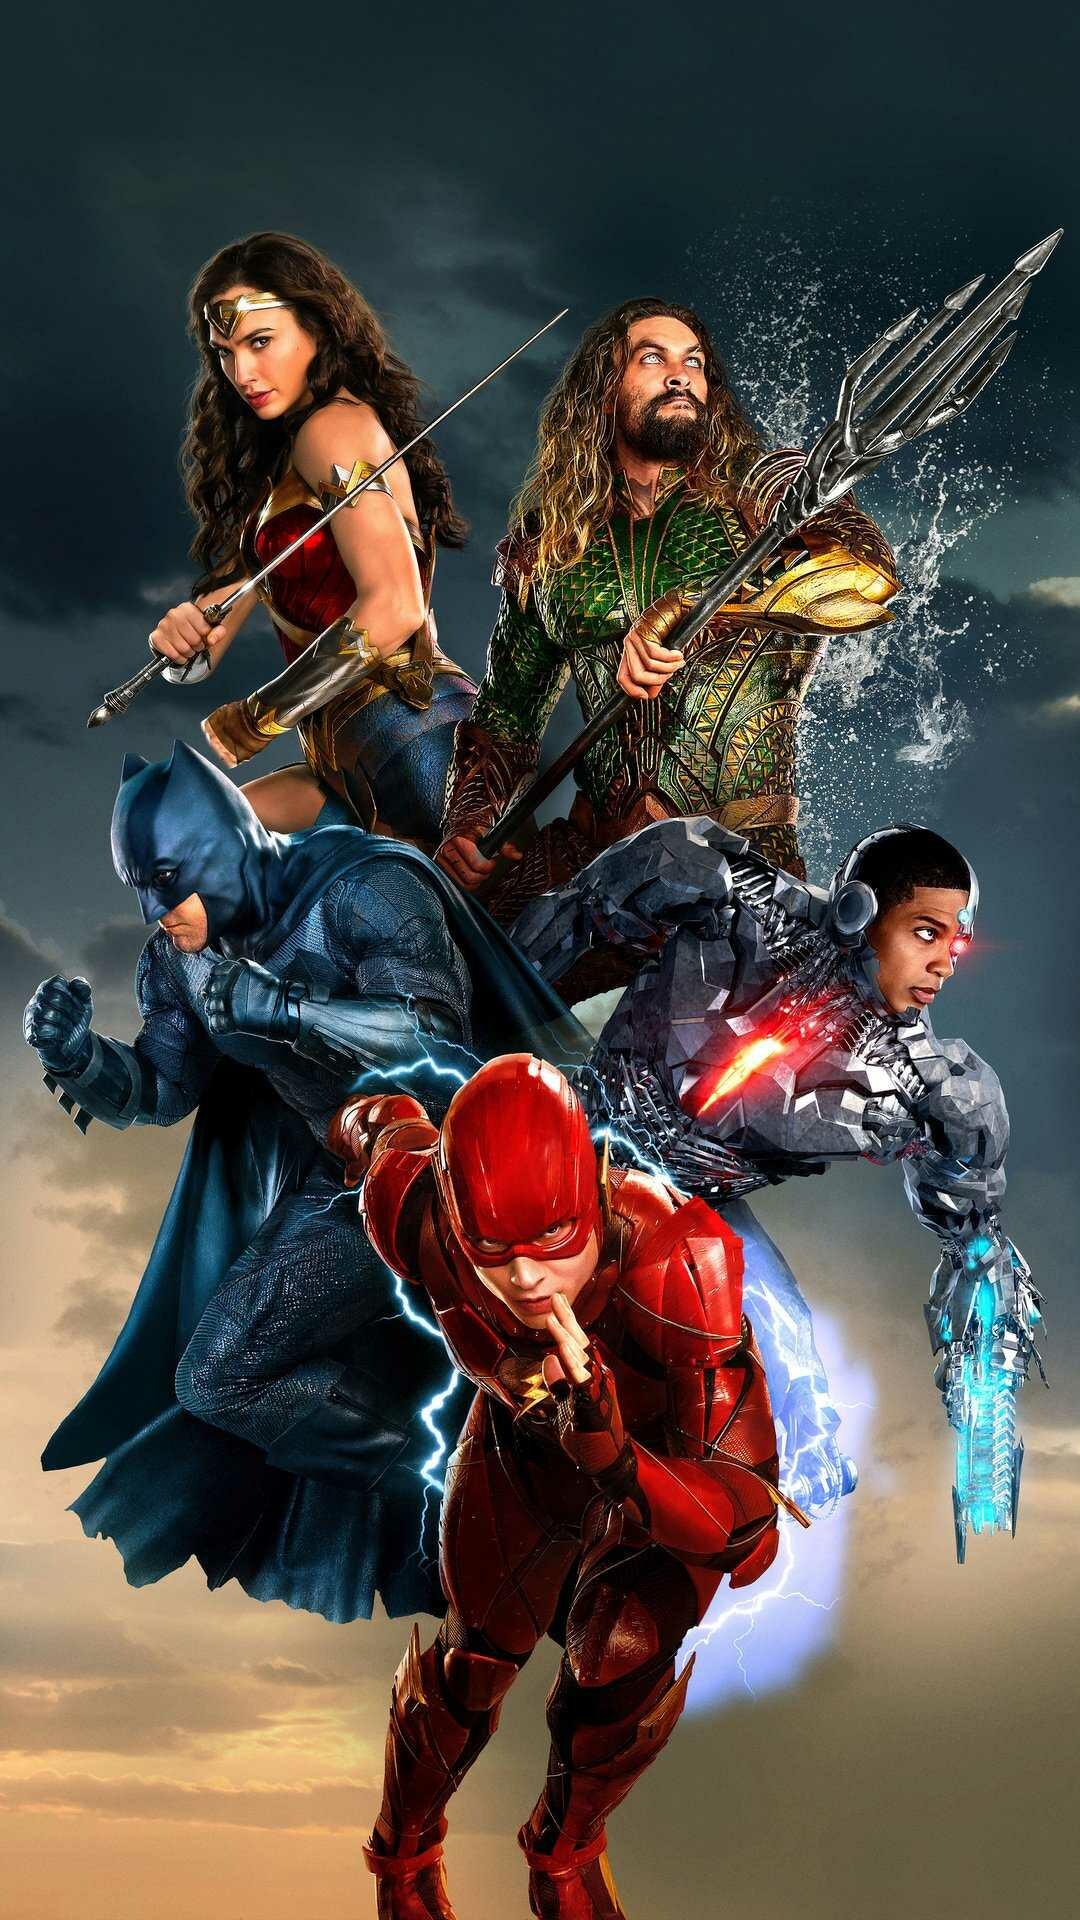 Justice League HD Android wallpapers, Superhero team, Action-packed, Epic battles, 1080x1920 Full HD Phone